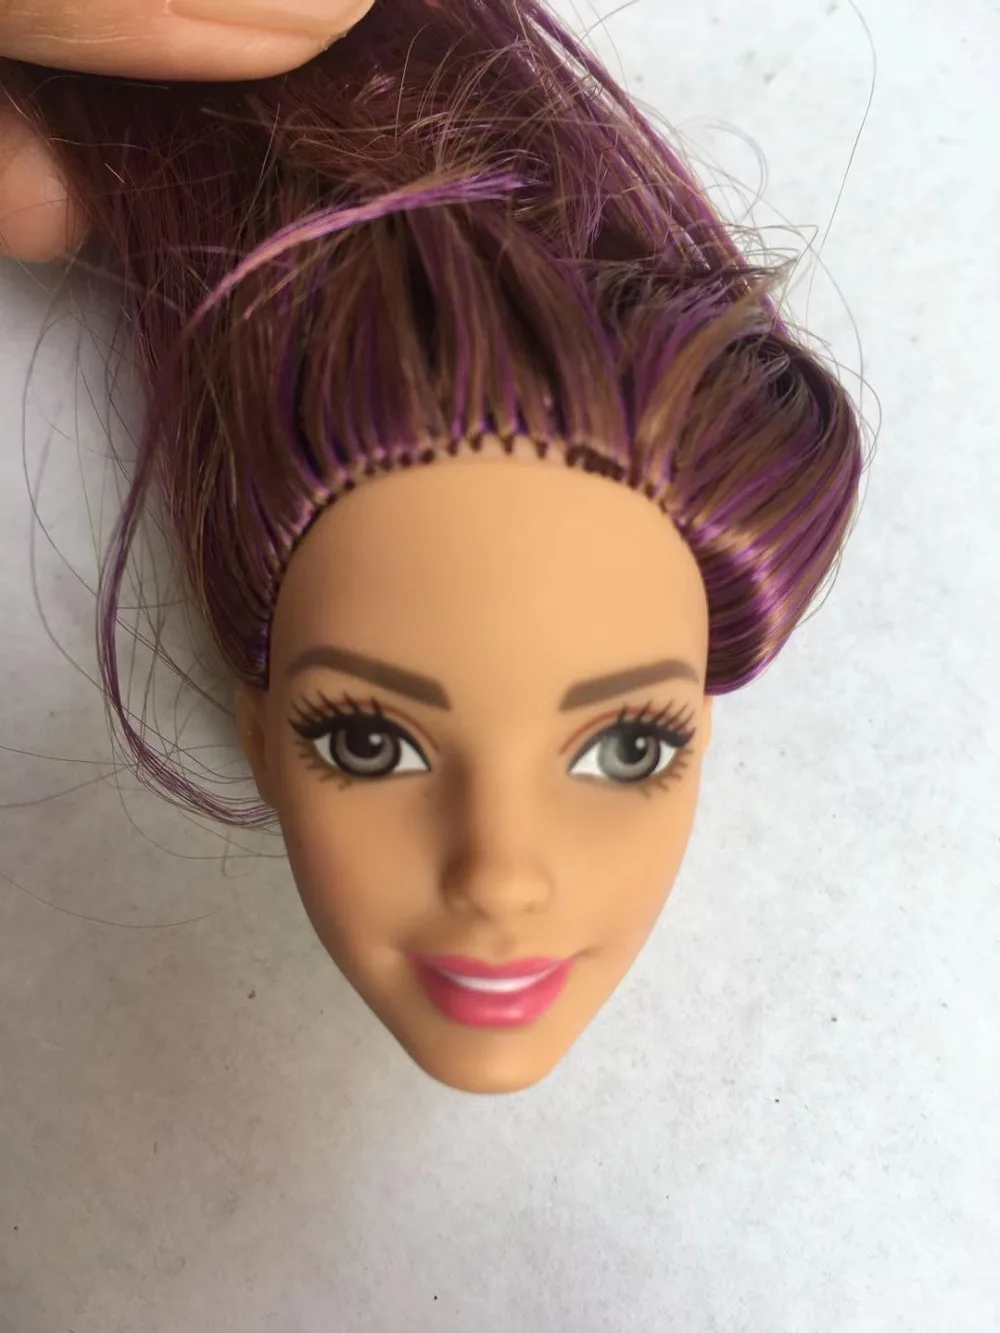 dimple-face-doll-heads (30)